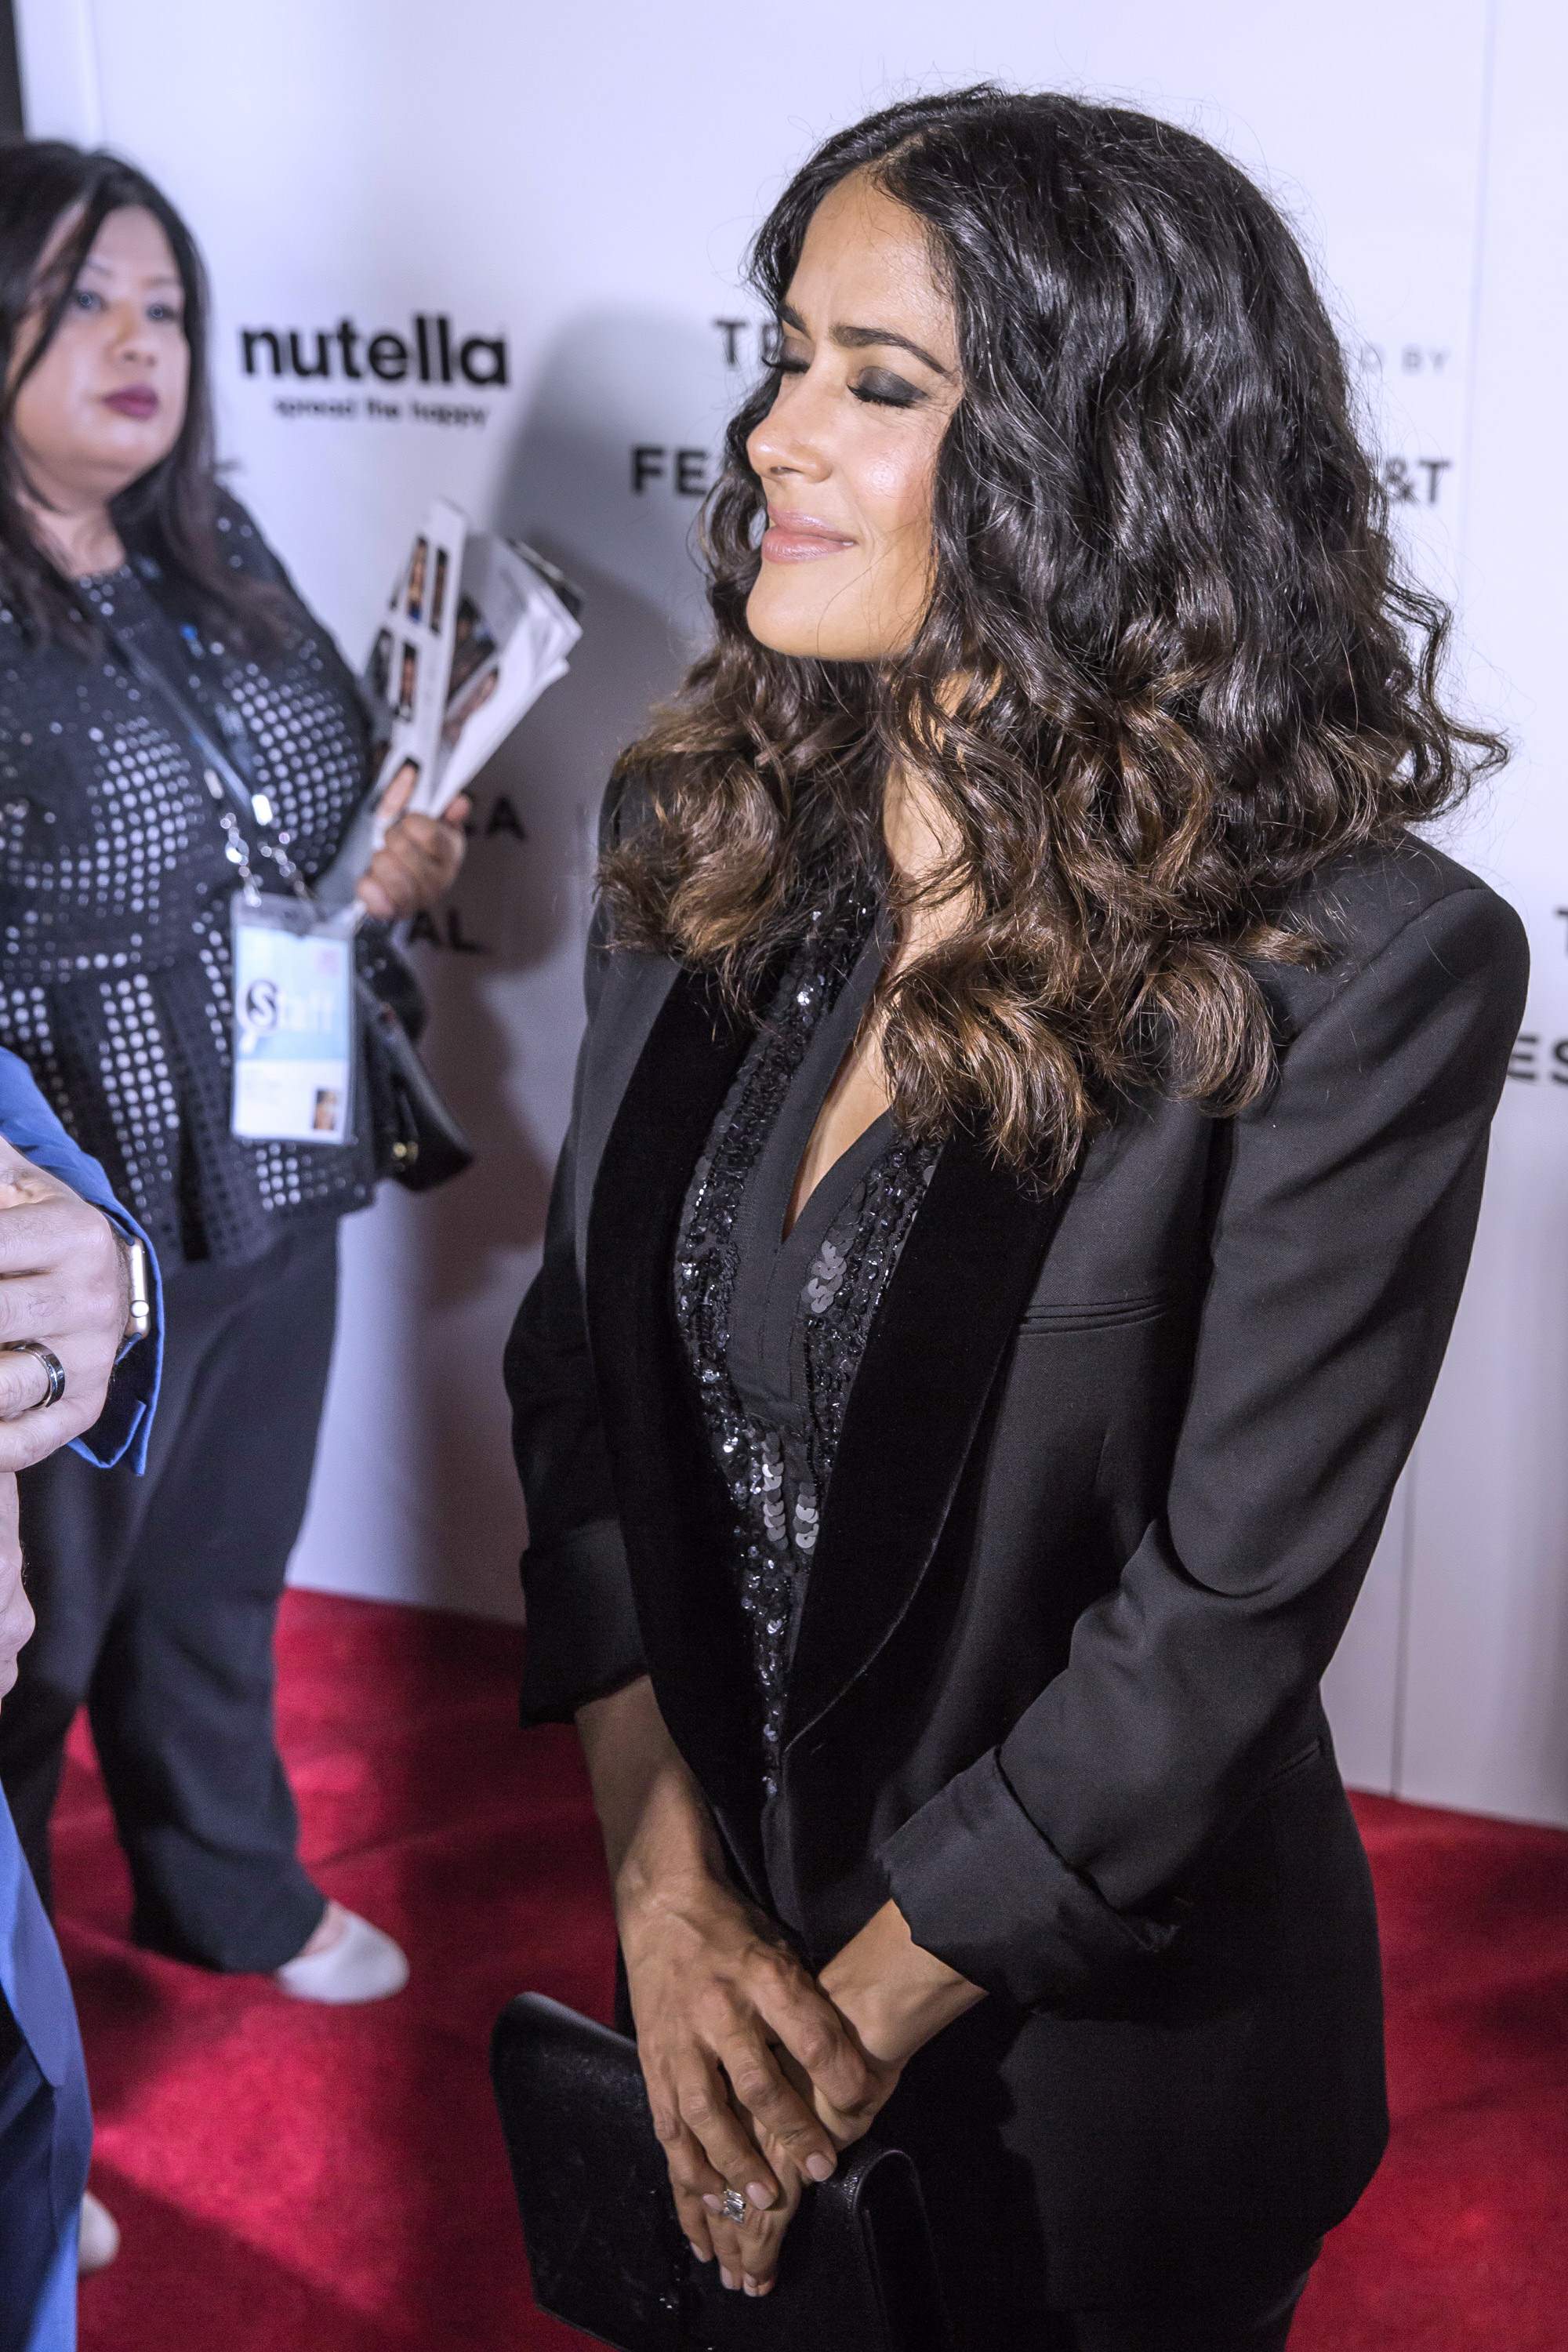 Salma Hayek attends Tribeca Shorts Group Therapy